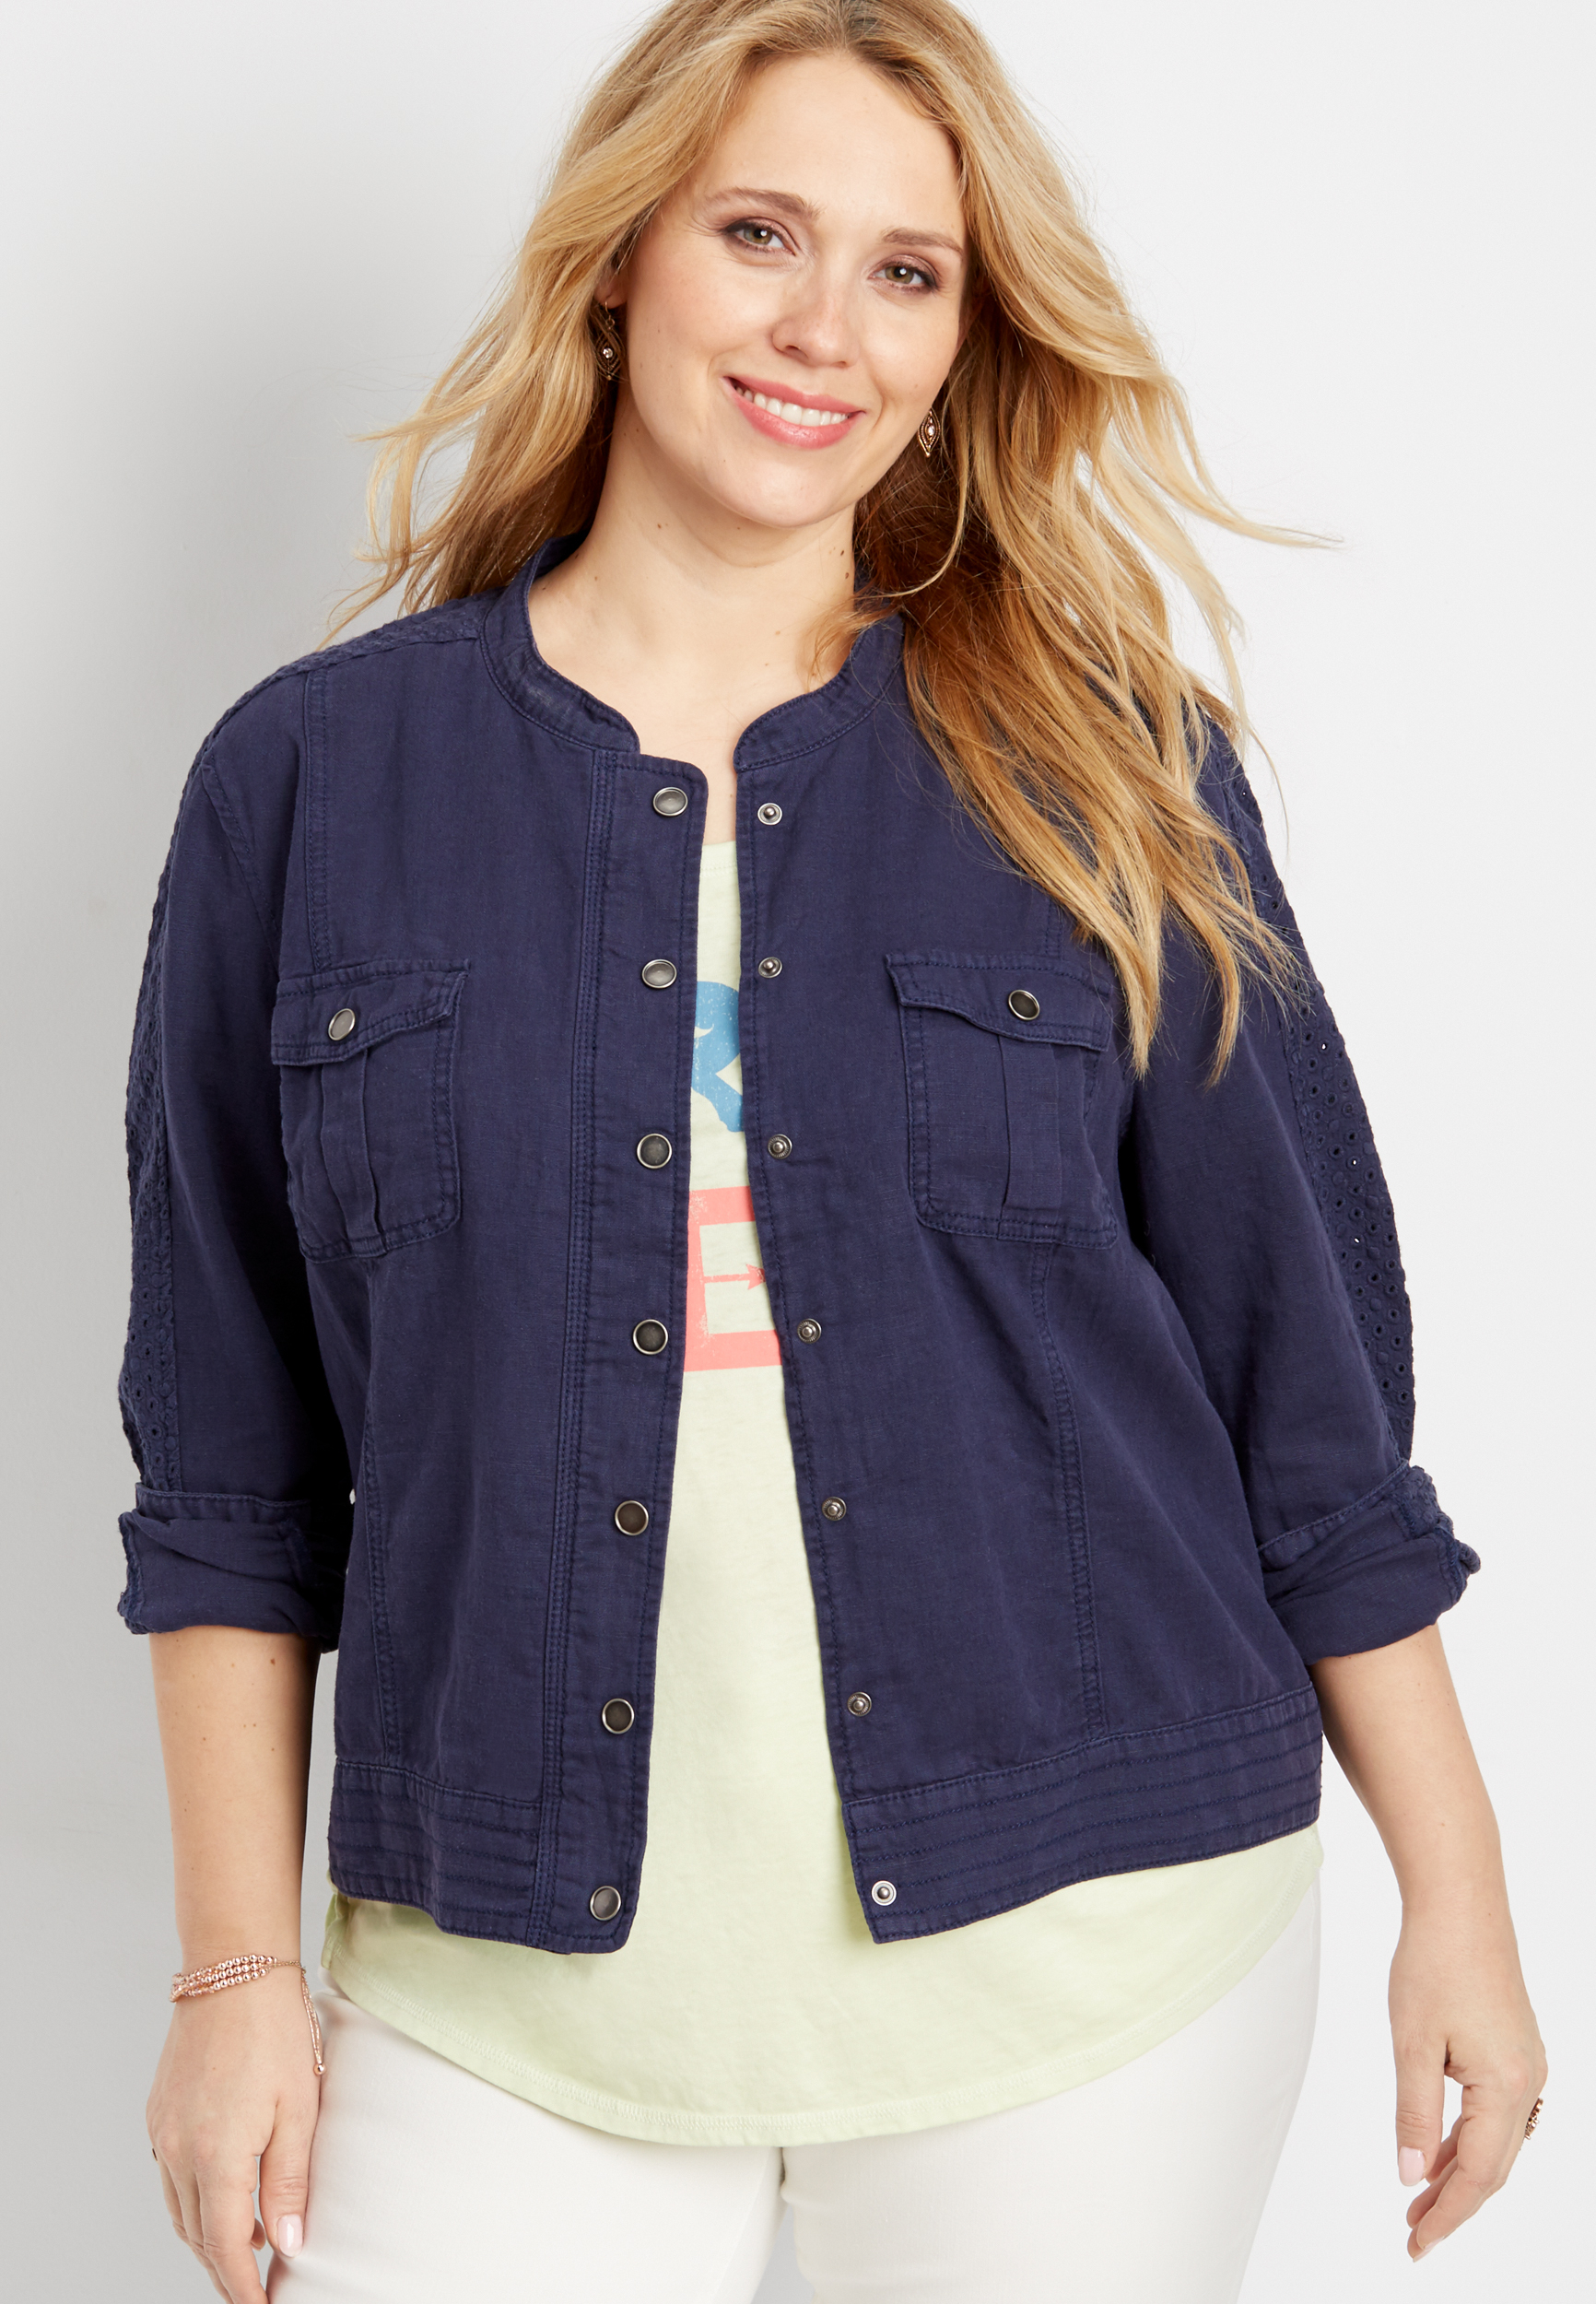 maurices jackets plus size